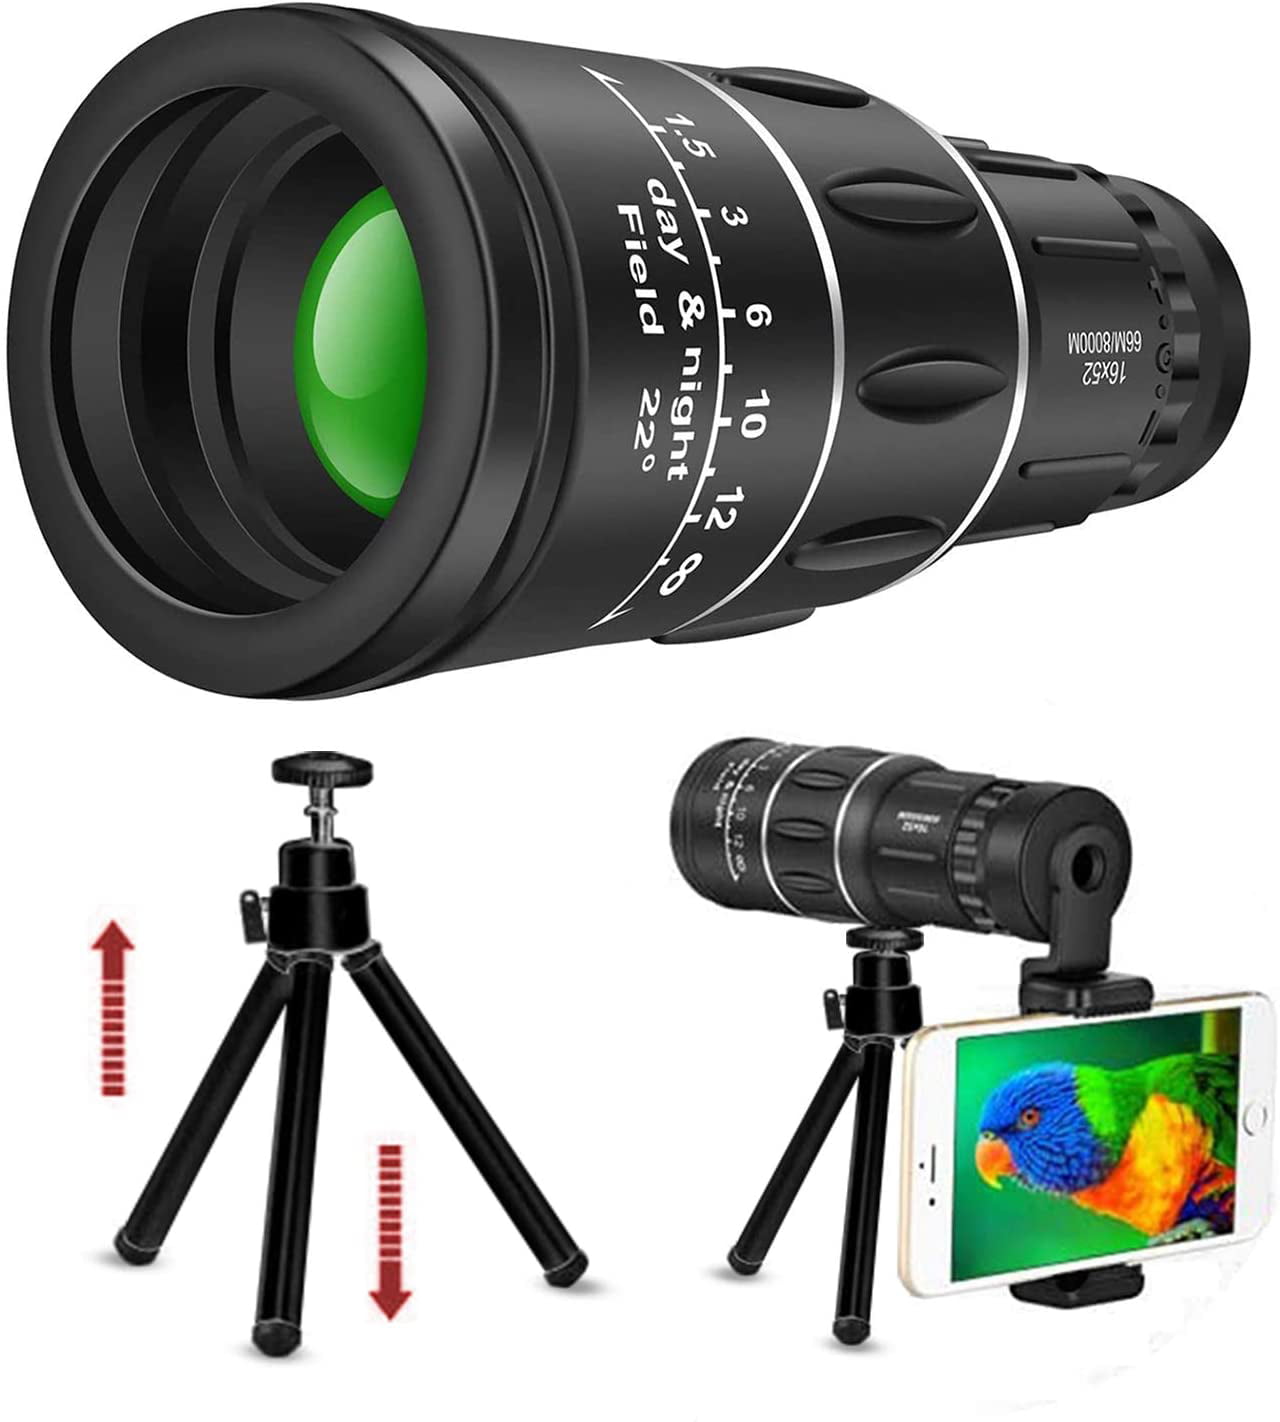 Monocular-Telescope High-Powered Monocular Dual Focus Optics Zoom Telescope for Adults Monocular with Durable and Clear 16X52 FMC BAK4 Prism with Smartphone Holder for Bird Watching Camping 